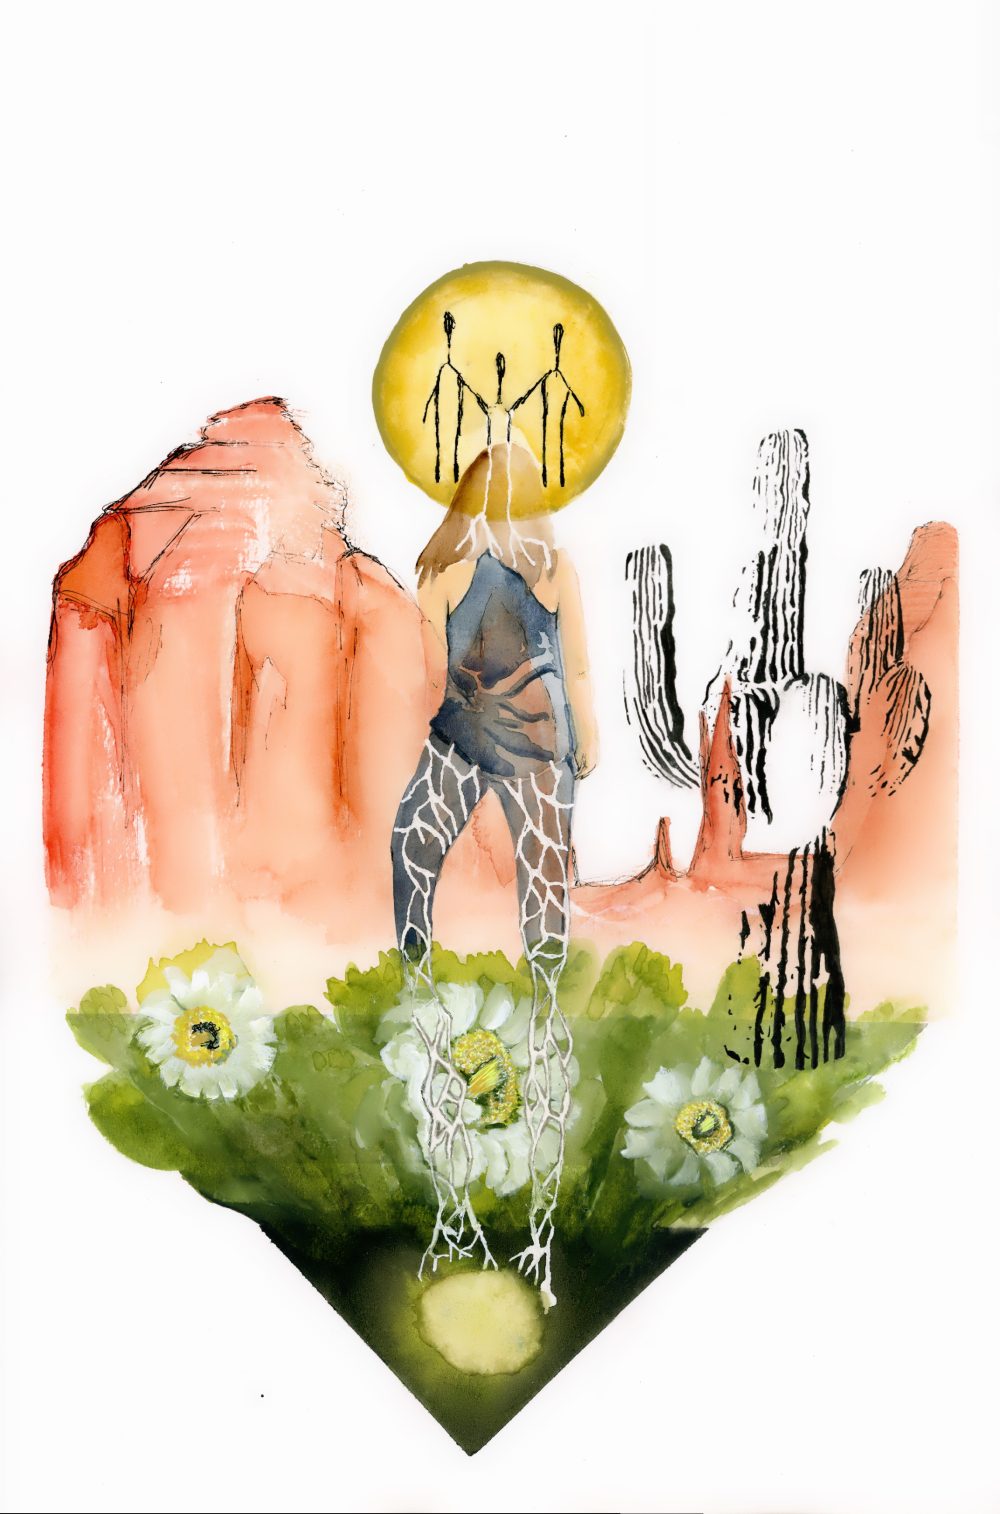 A colorful drawing depicting a rocky landscape, a cactus and a field of flowers. The figure of a woman is in the center. There is a yellow globe over her head featuring three stick figures. White veins descend from the globe down her body.